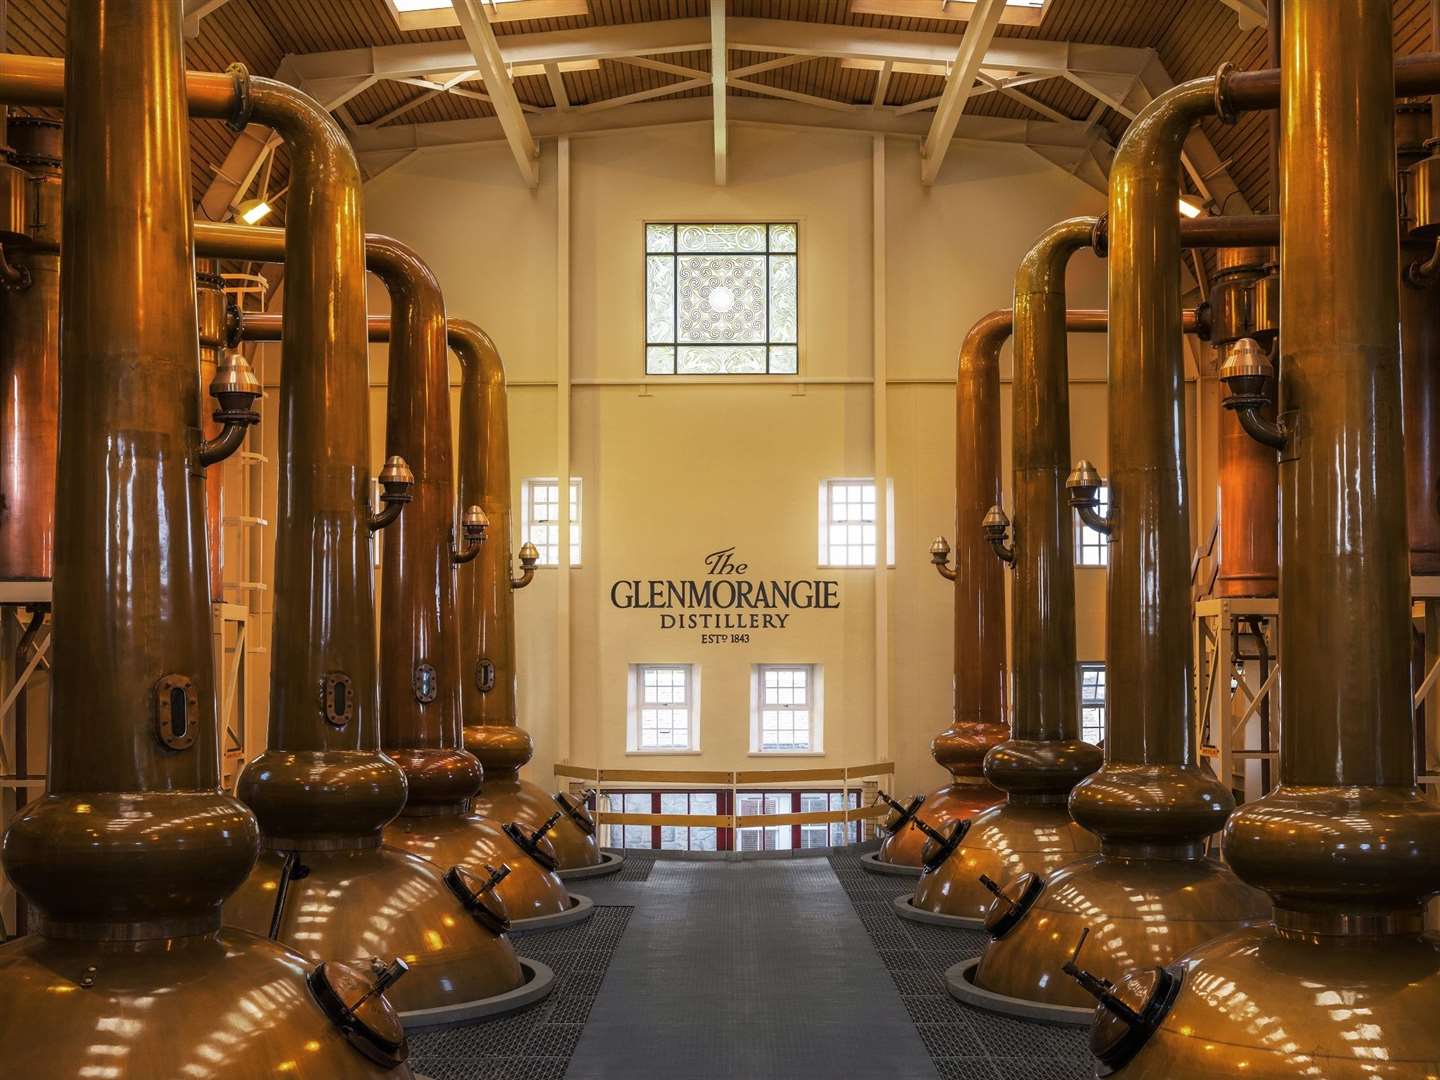 Maree Todd highlighted Glenmorangie as one of the region's 'iconic' whisky distilleries.